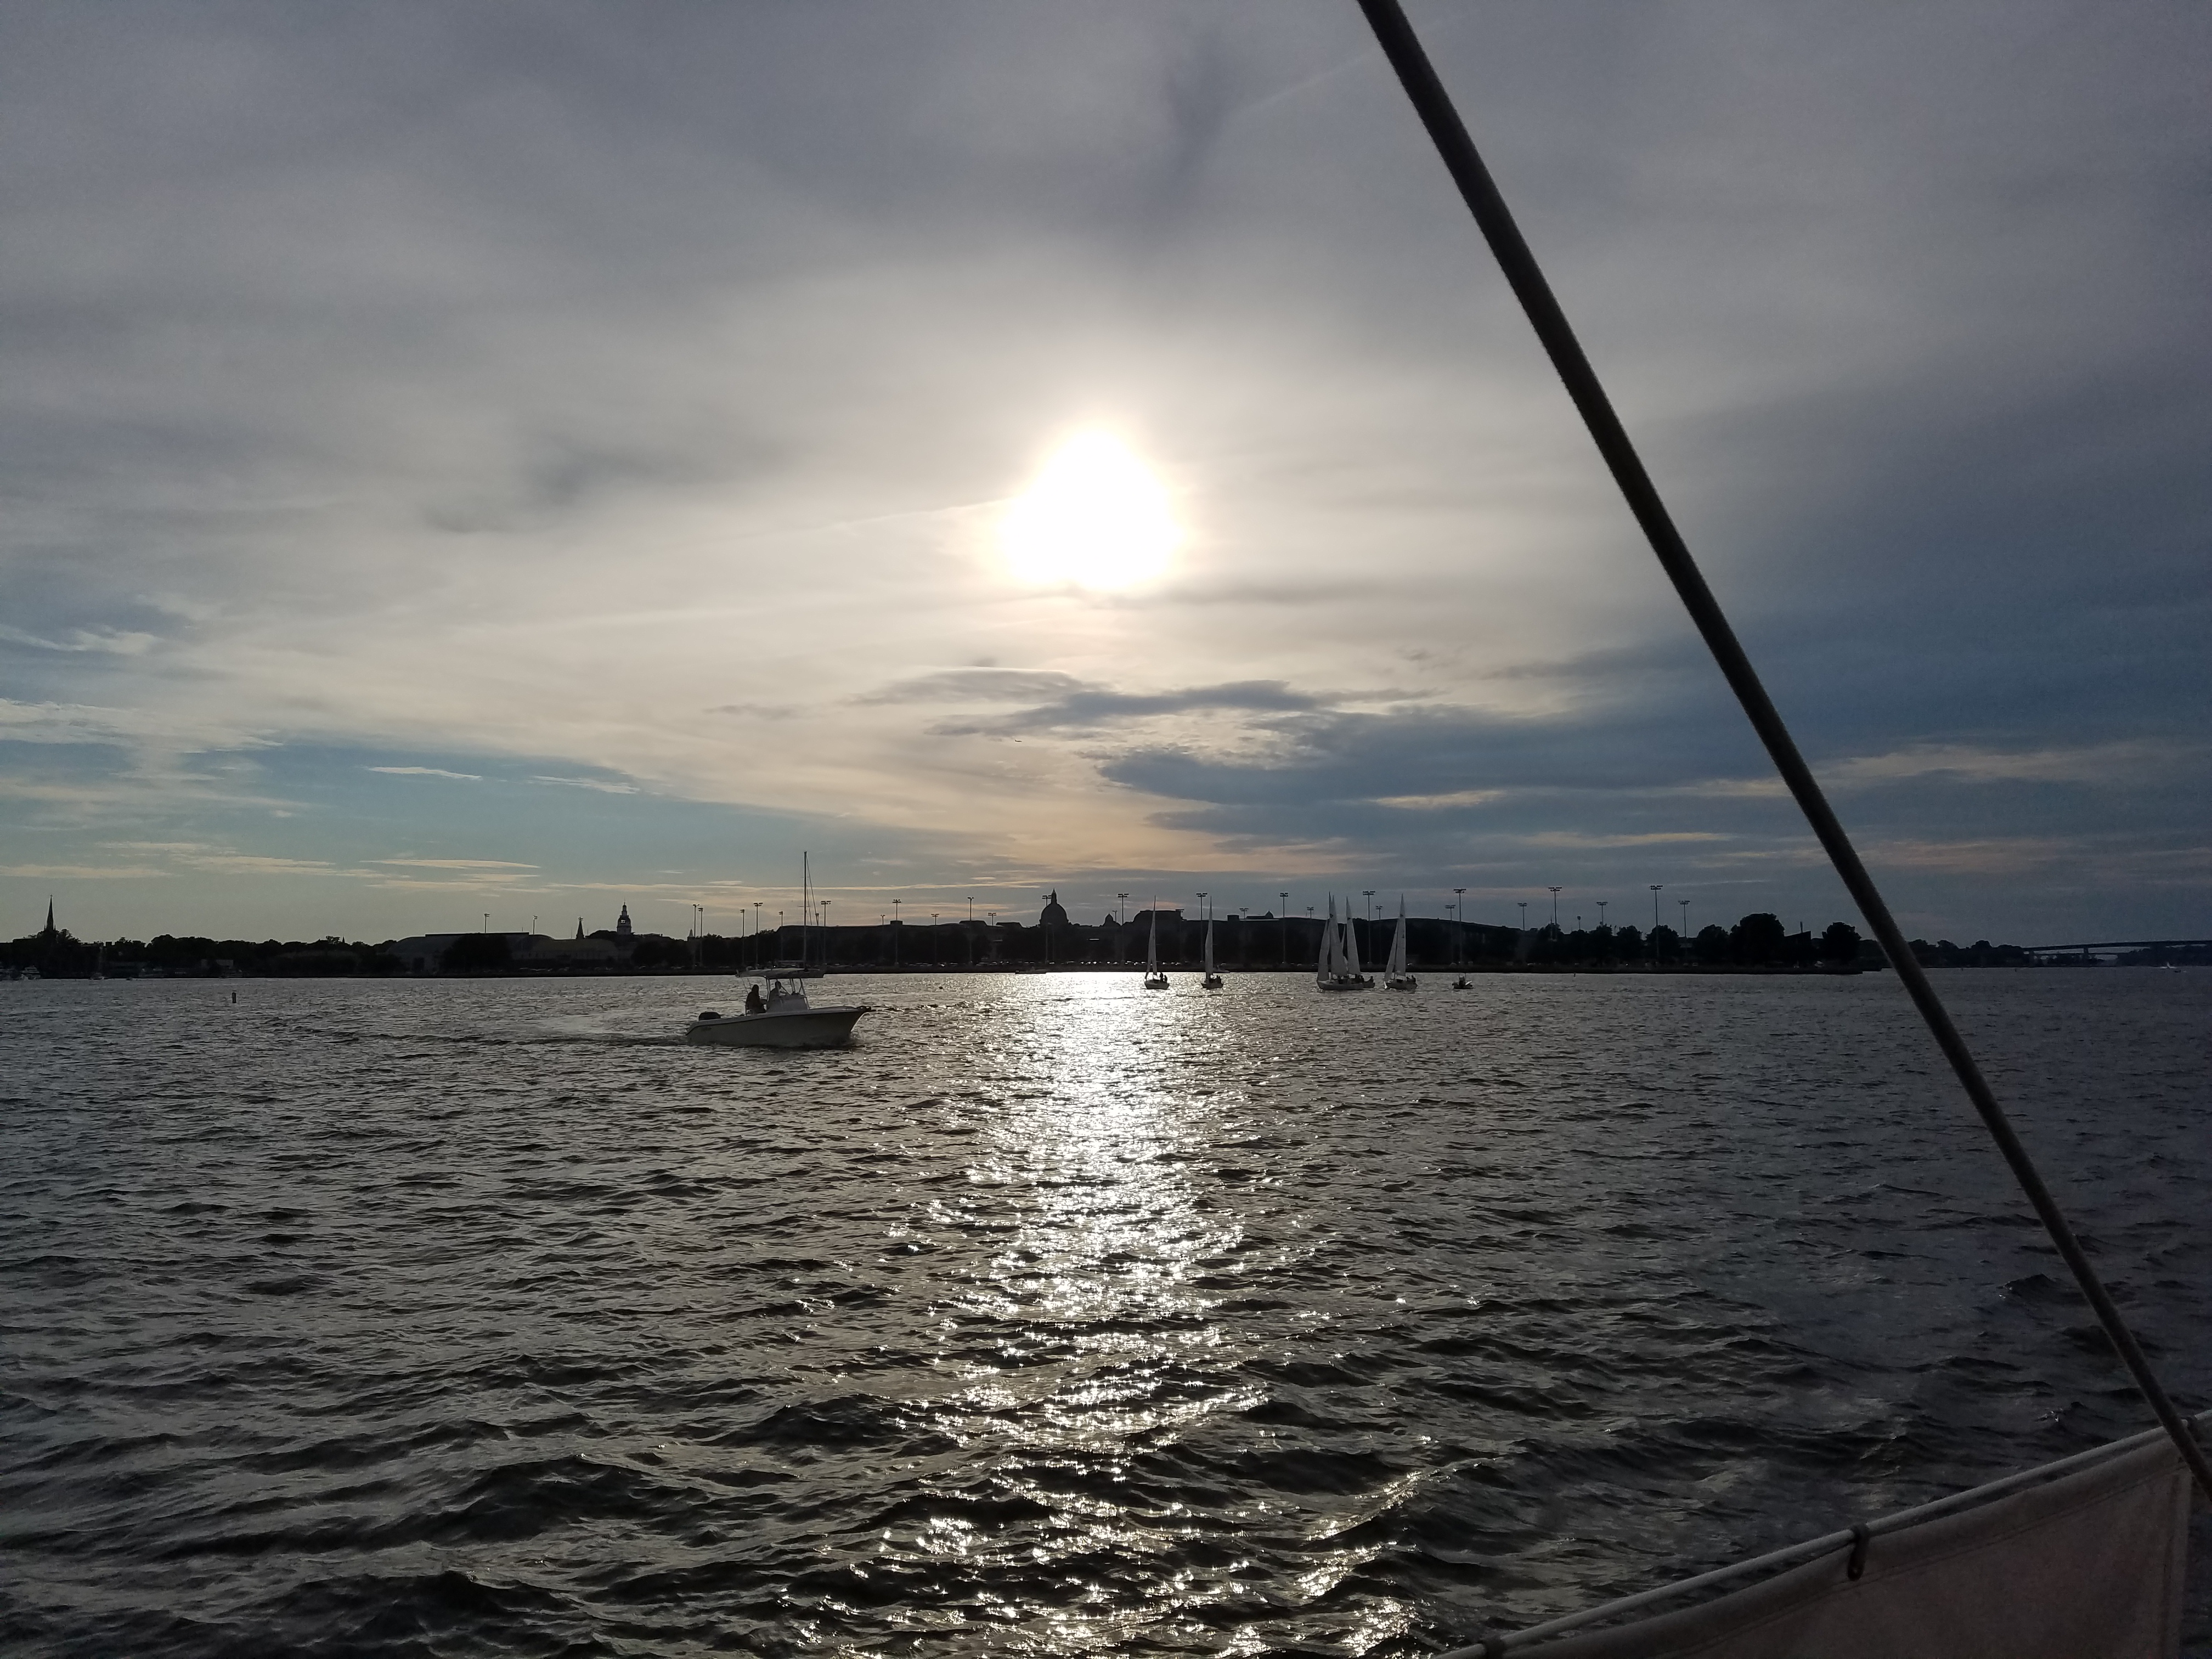 Dark waters and bright sun reflecting on them over Annapolis